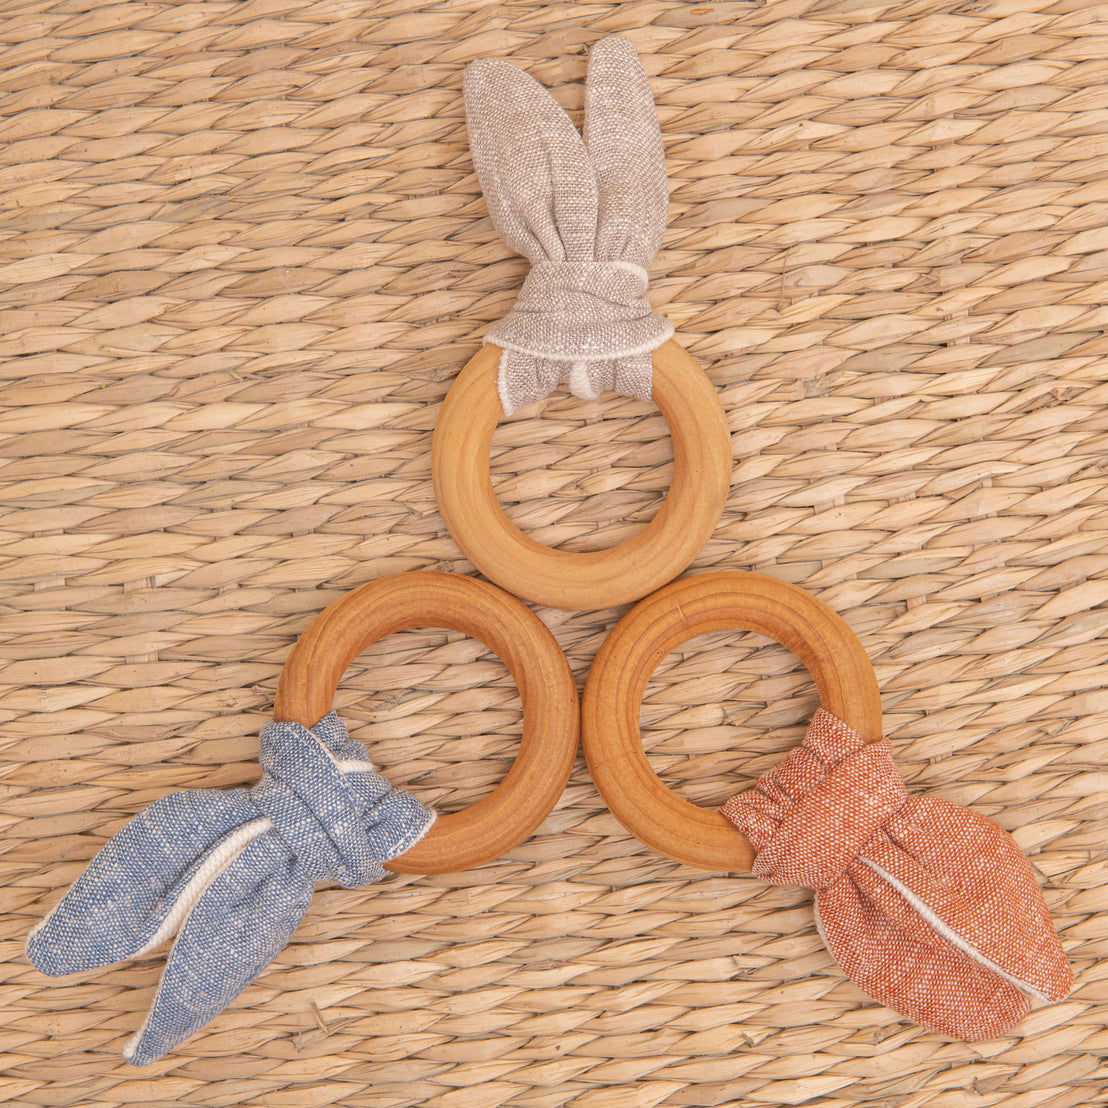  Flat lay photo of all three Silas Wooden Teether Rings, including the colors red, tan, and blue. The teether ring is made from organic maple wood and features a linen and french terry tie